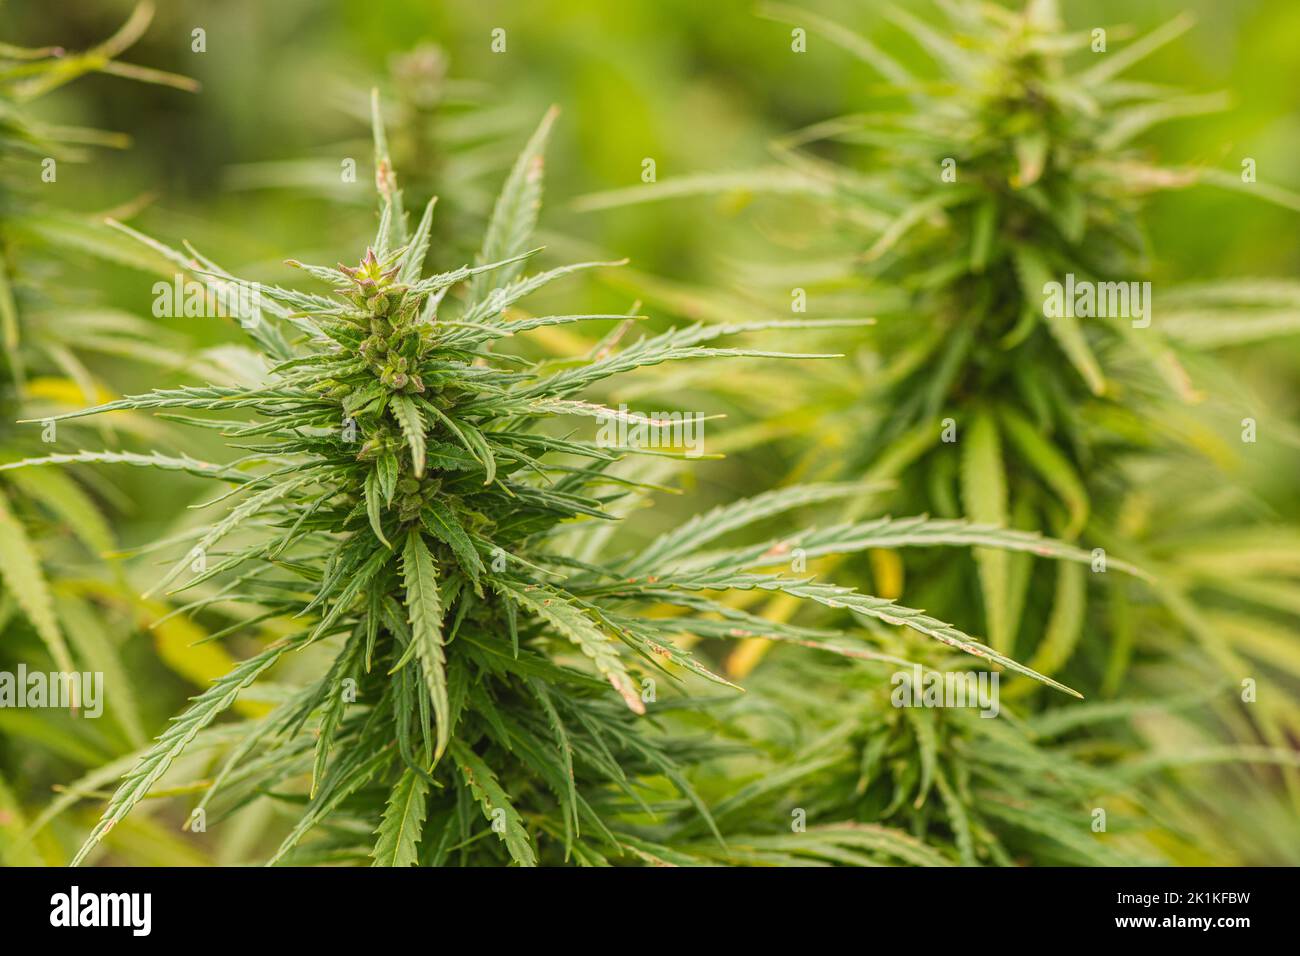 Marijuana, cannabis or hemp plant with bud and green leaves growing in a garden, close up. Concept of biological agriculture, bio product, bio ecology Stock Photo